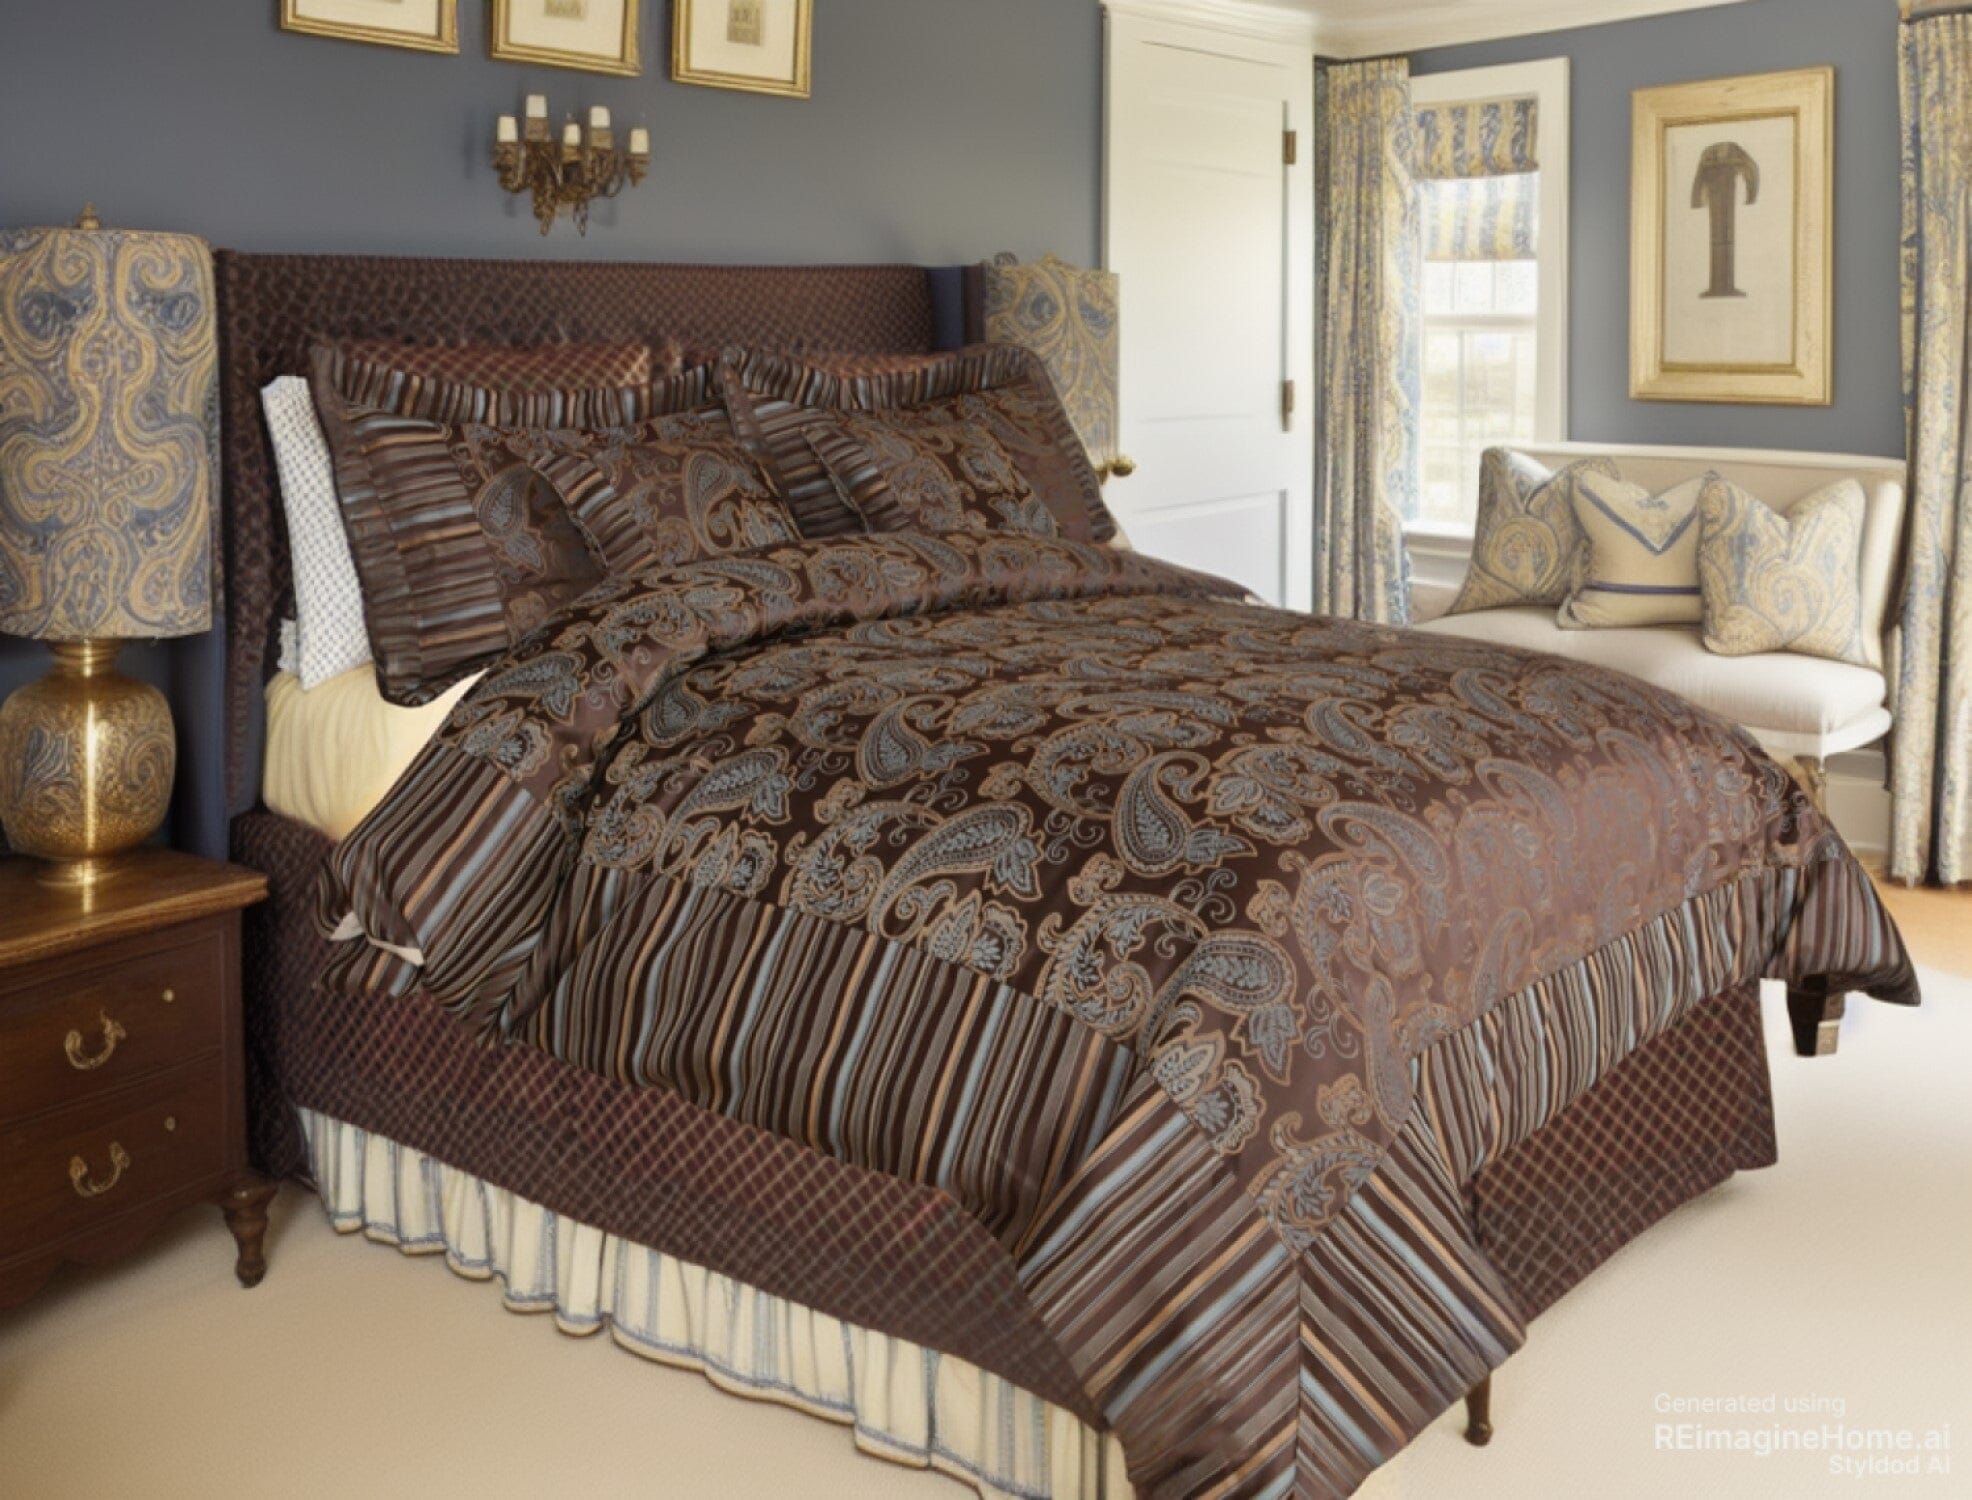 Tache Chenille Elegant Paisley Floral Striped Brown Blue Eastern Comforter Set With Zipper Cover (14070)